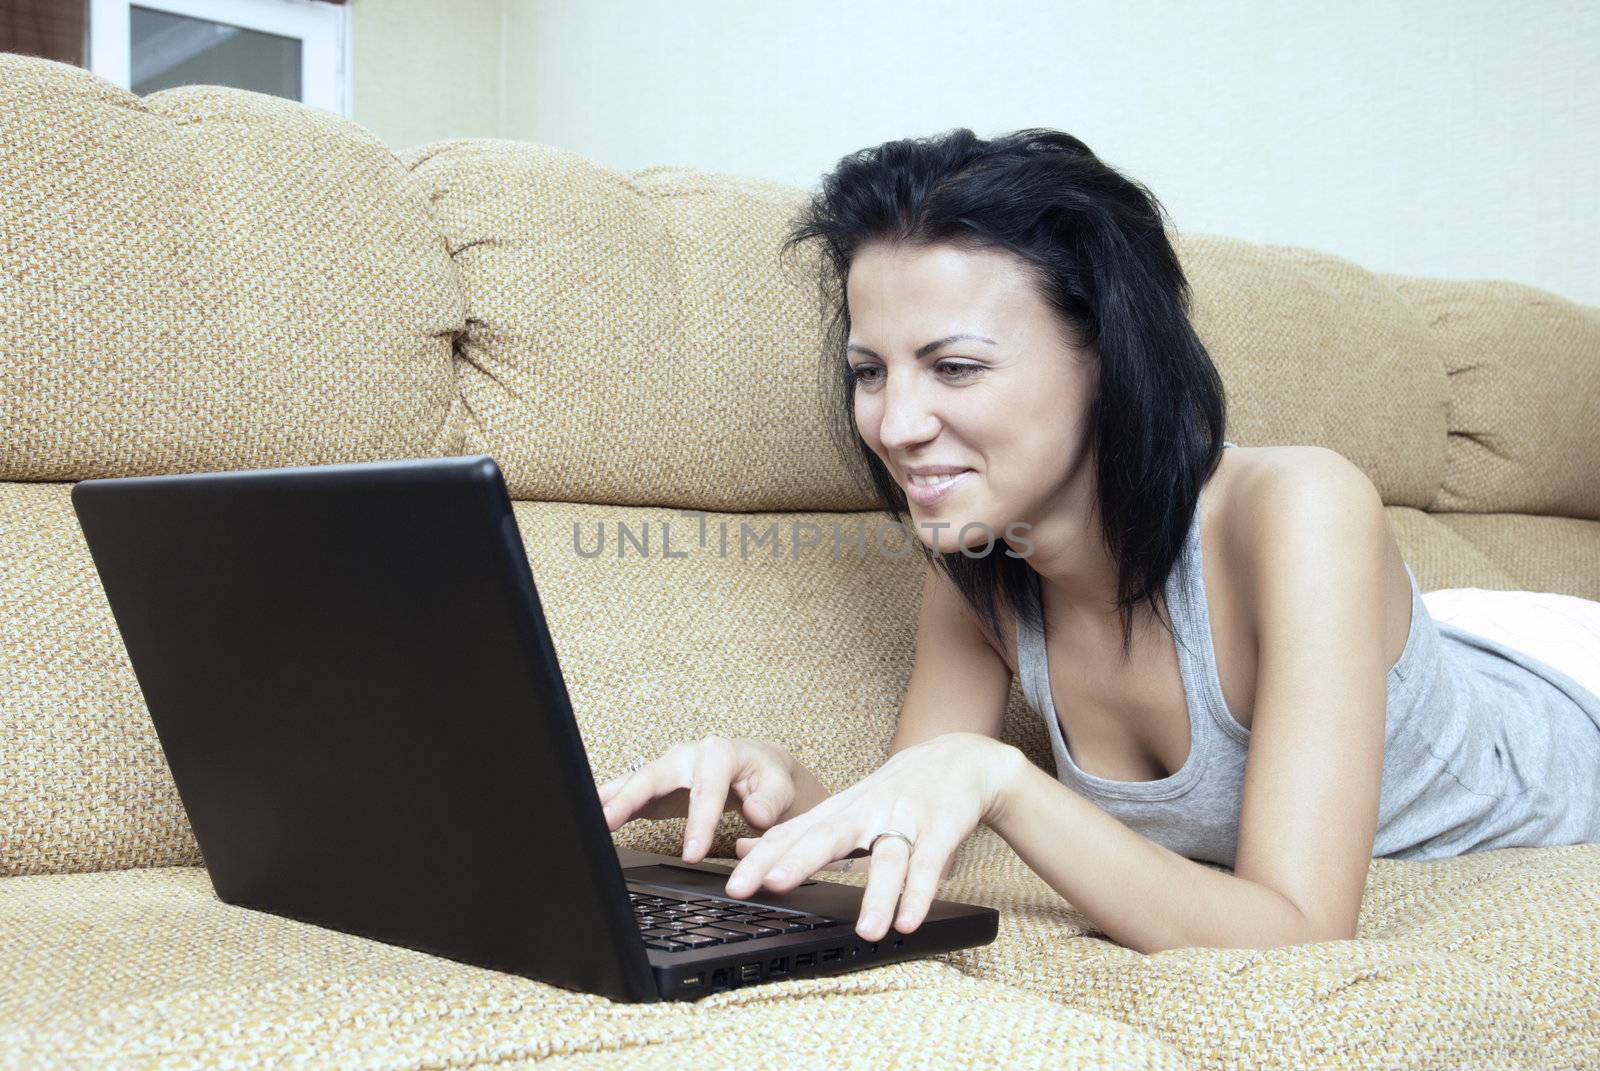 Lady laying on sofa and using wireless notebook